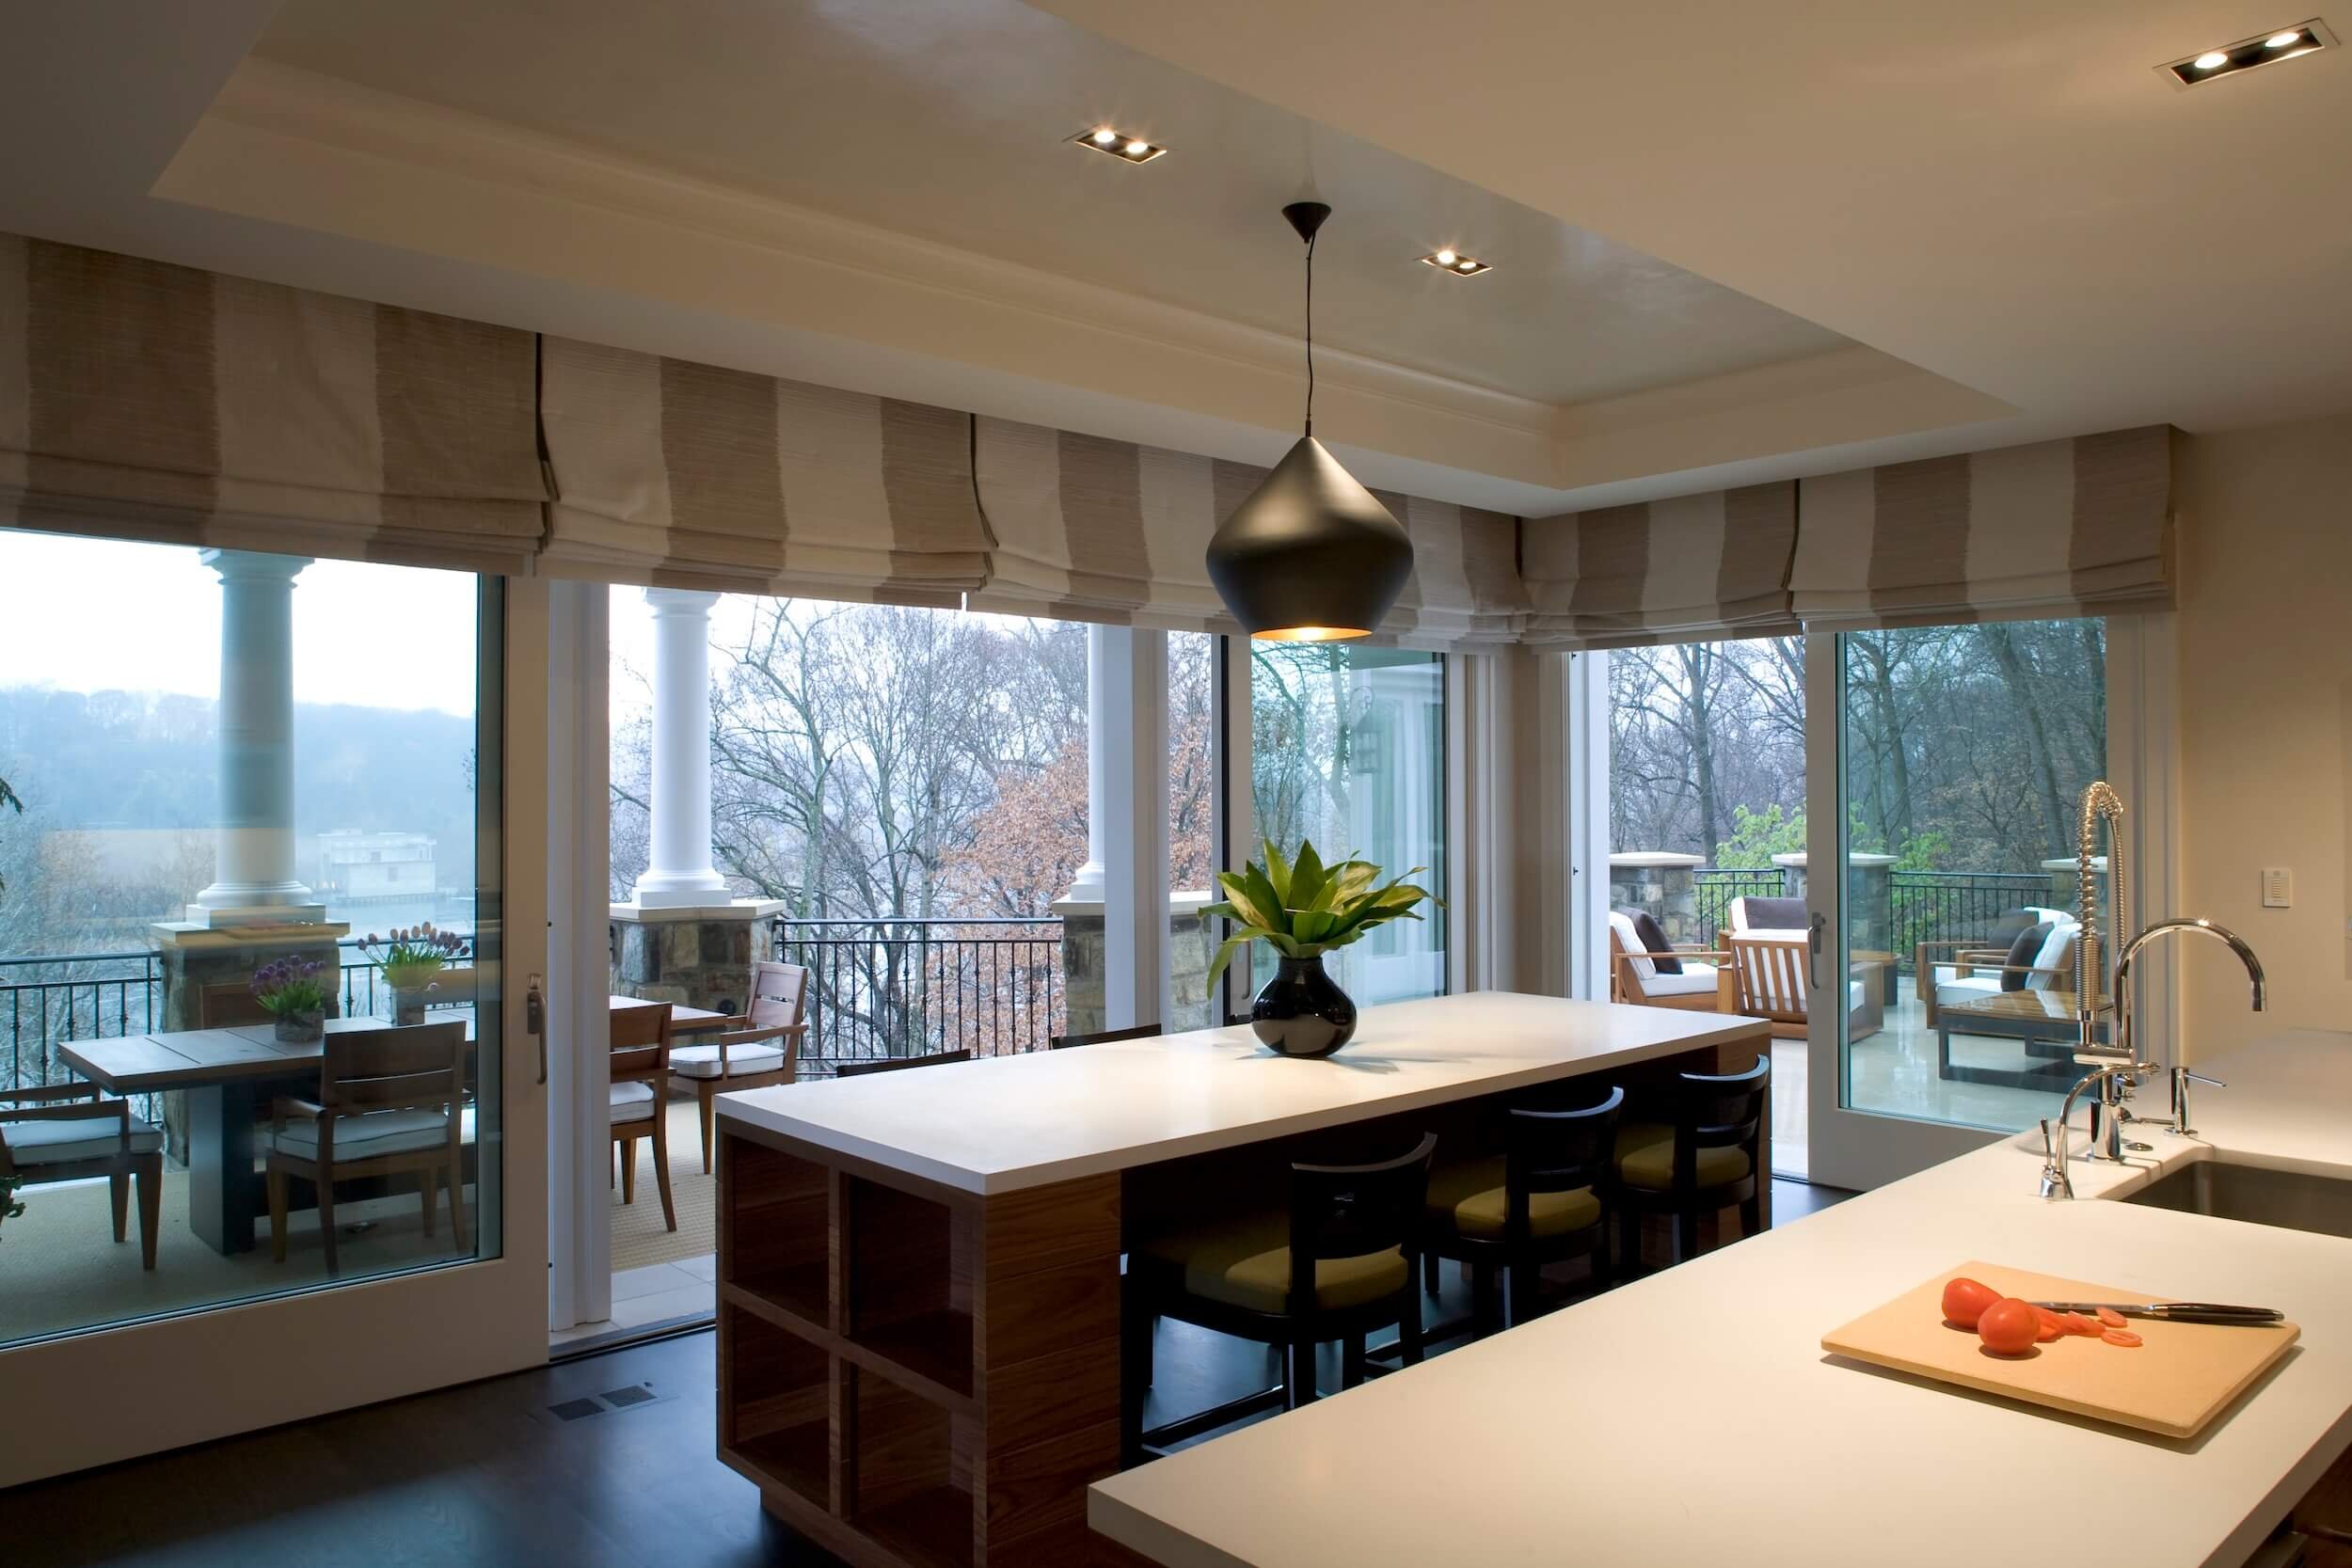 A Modern kitchen with an island surrounded by large sliding doors and custom roman shades